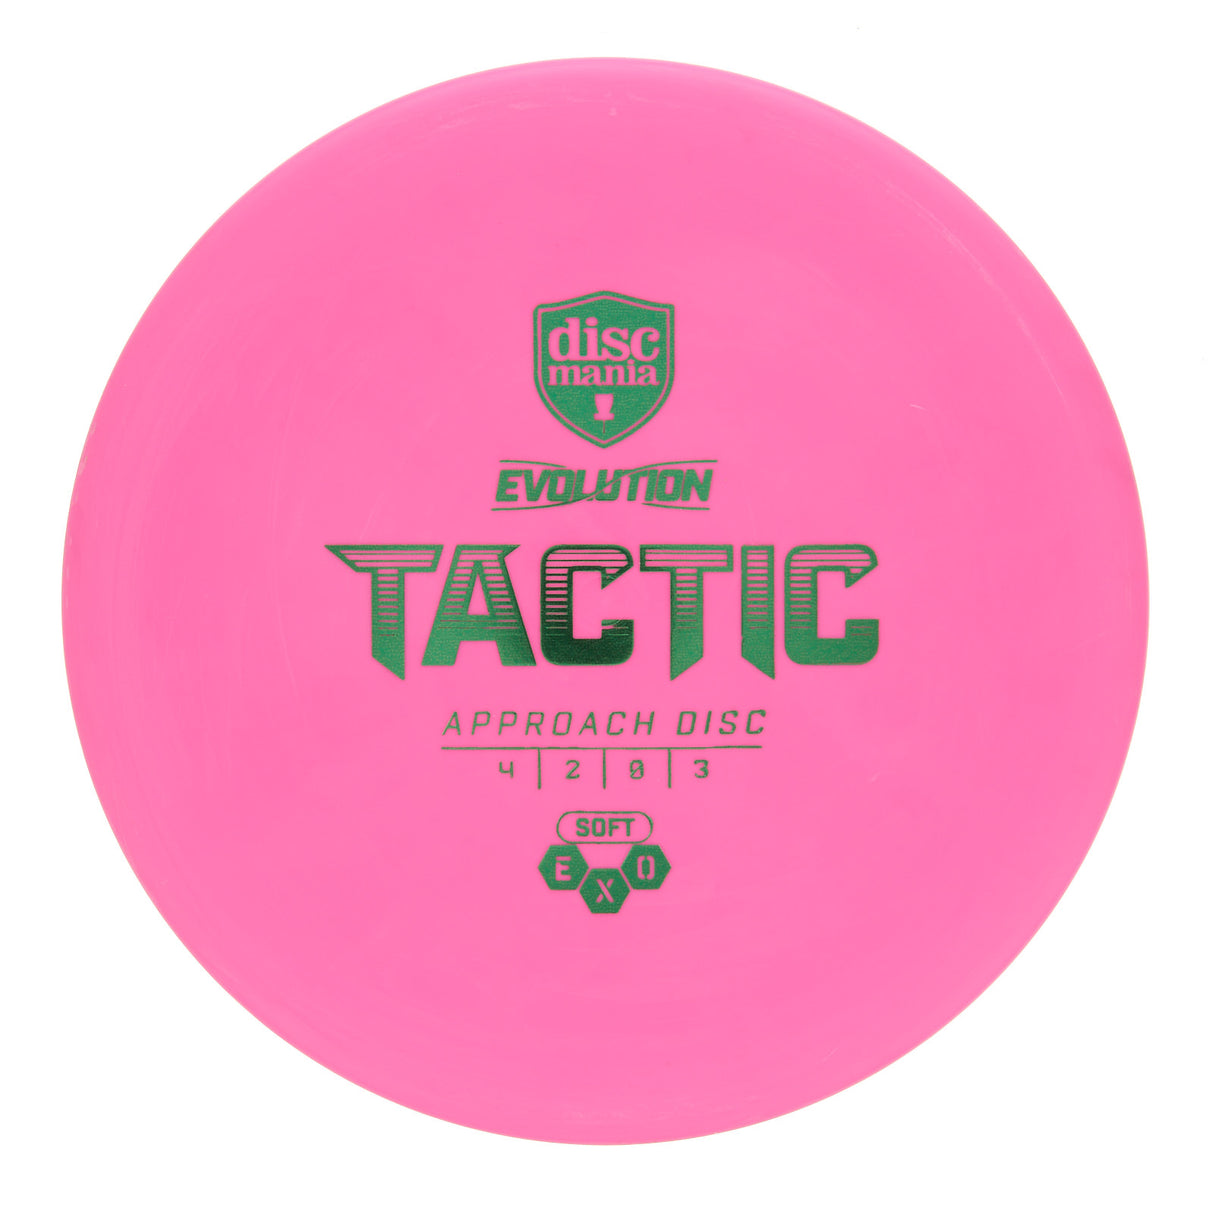 Discmania Tactic - Exo Soft 173g | Style 0001